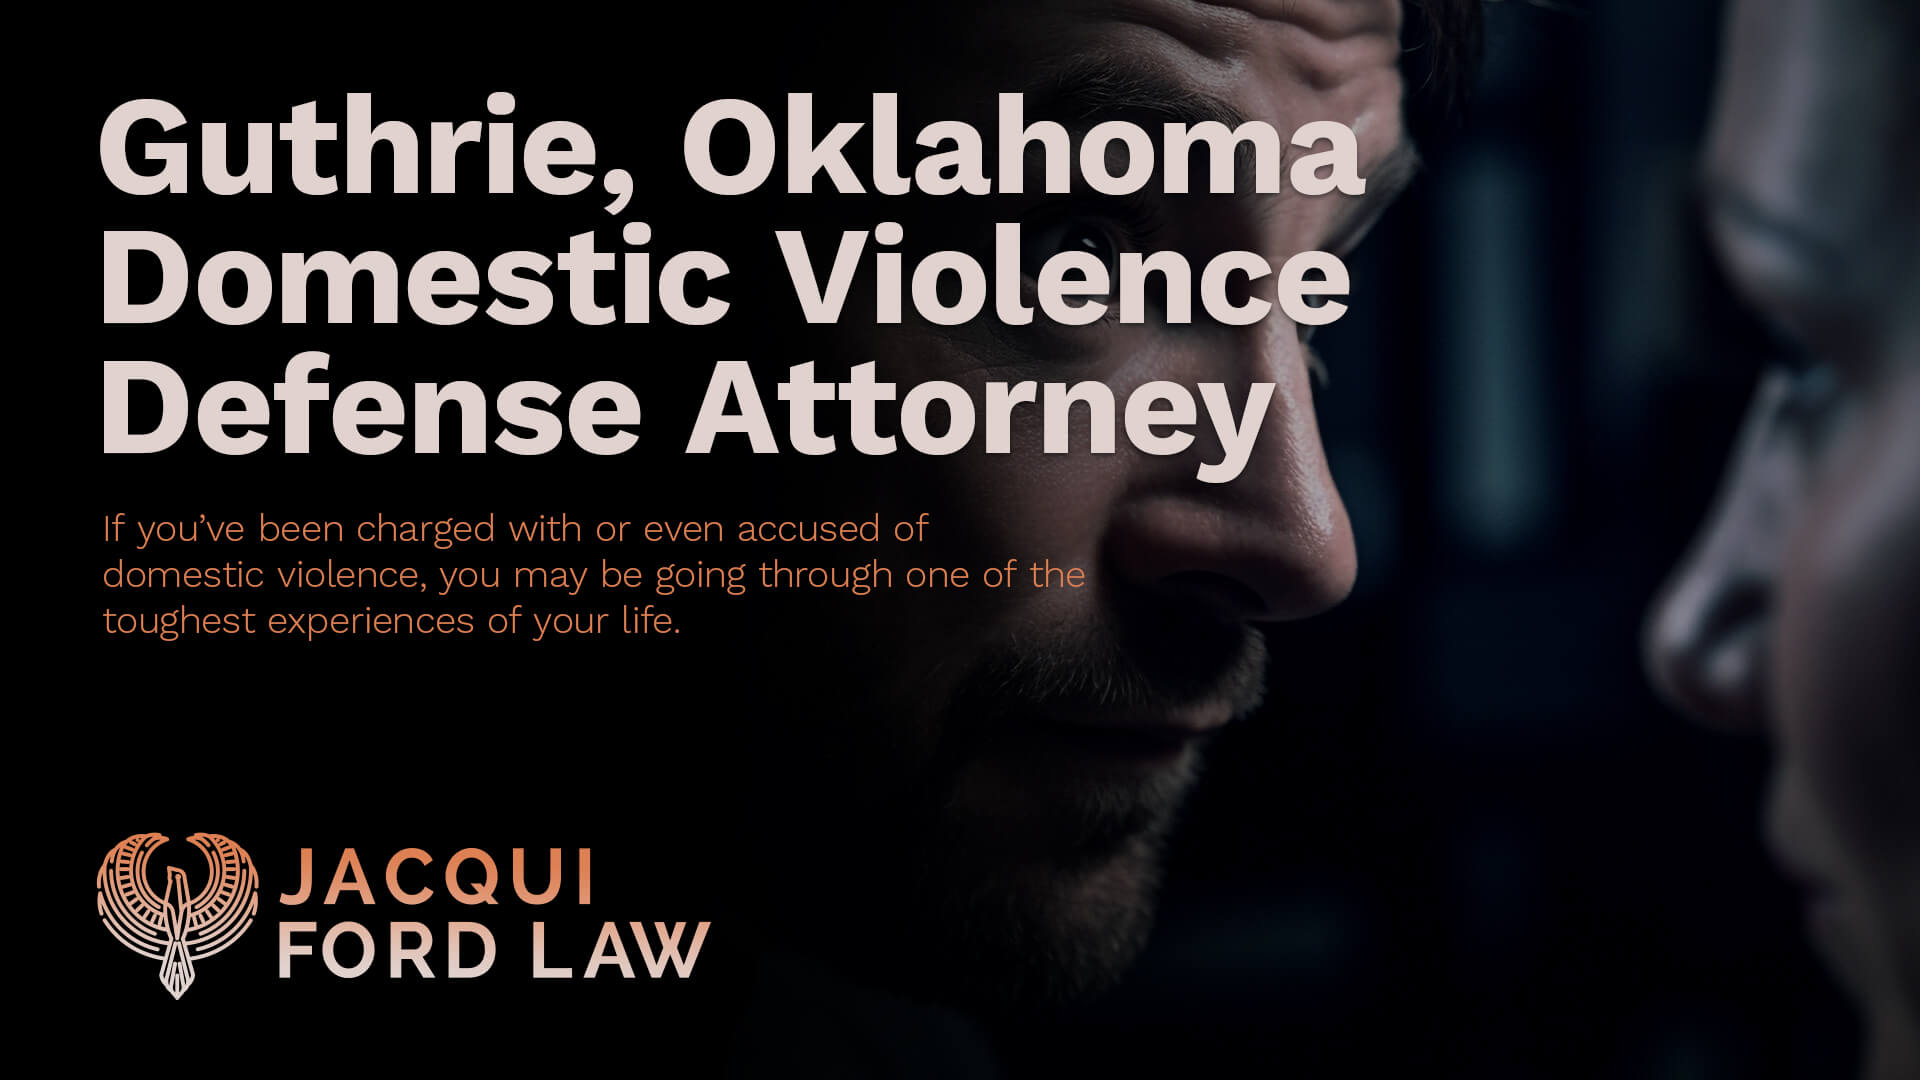 Guthrie Oklahoma Domestic Violence Defense Attorney - jacqui ford law